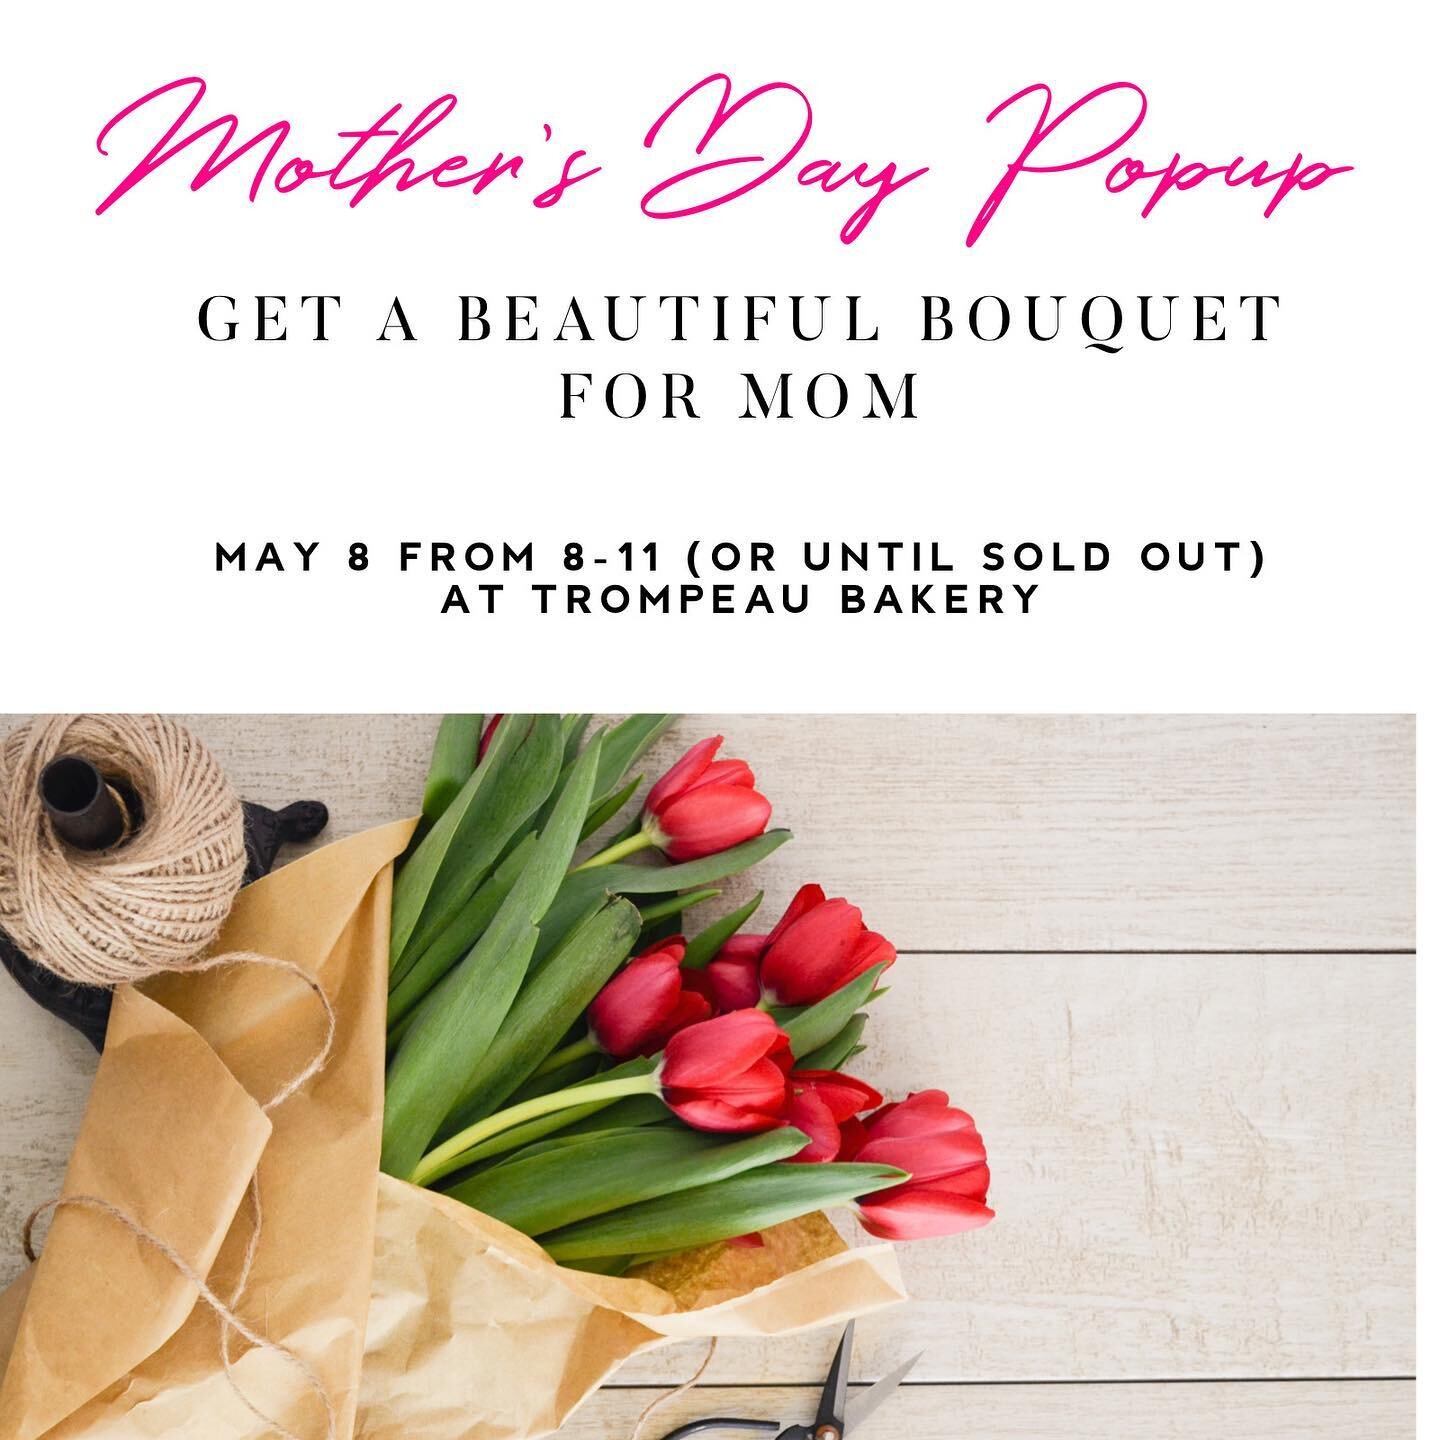 Come get a gorgeous bouquet for mom this Saturday from 8-11 (or until sold out) @trompeaubakery! Flowers are such a beautiful and thoughtful gift that will let her know you&rsquo;re thinking of her. #denverflorist #englewoodcolorado #popup #denverpop